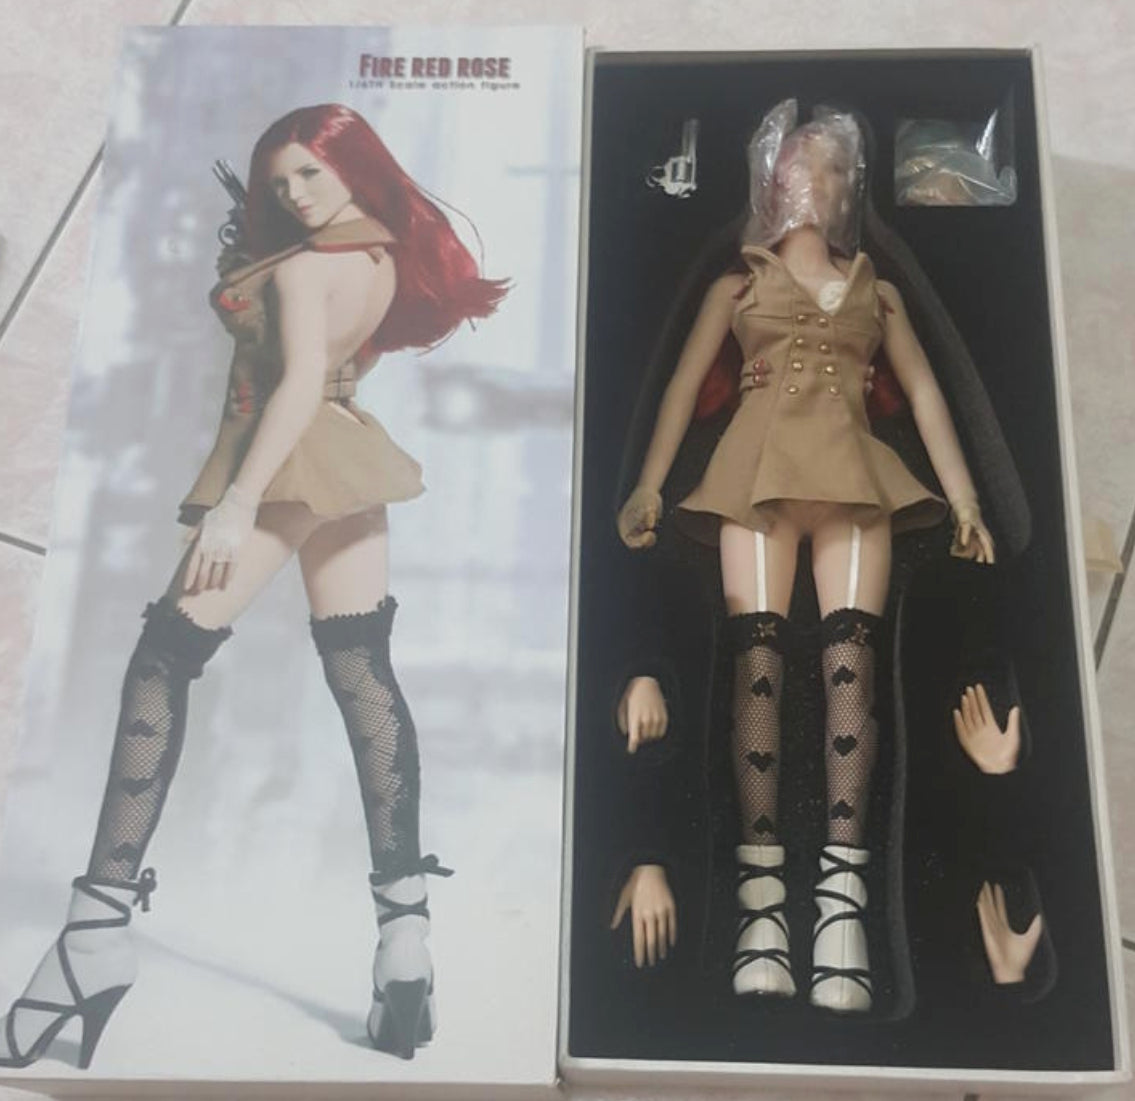 Phicen 1/6 12" PL2013-19 Fire Red Rose Action Figure